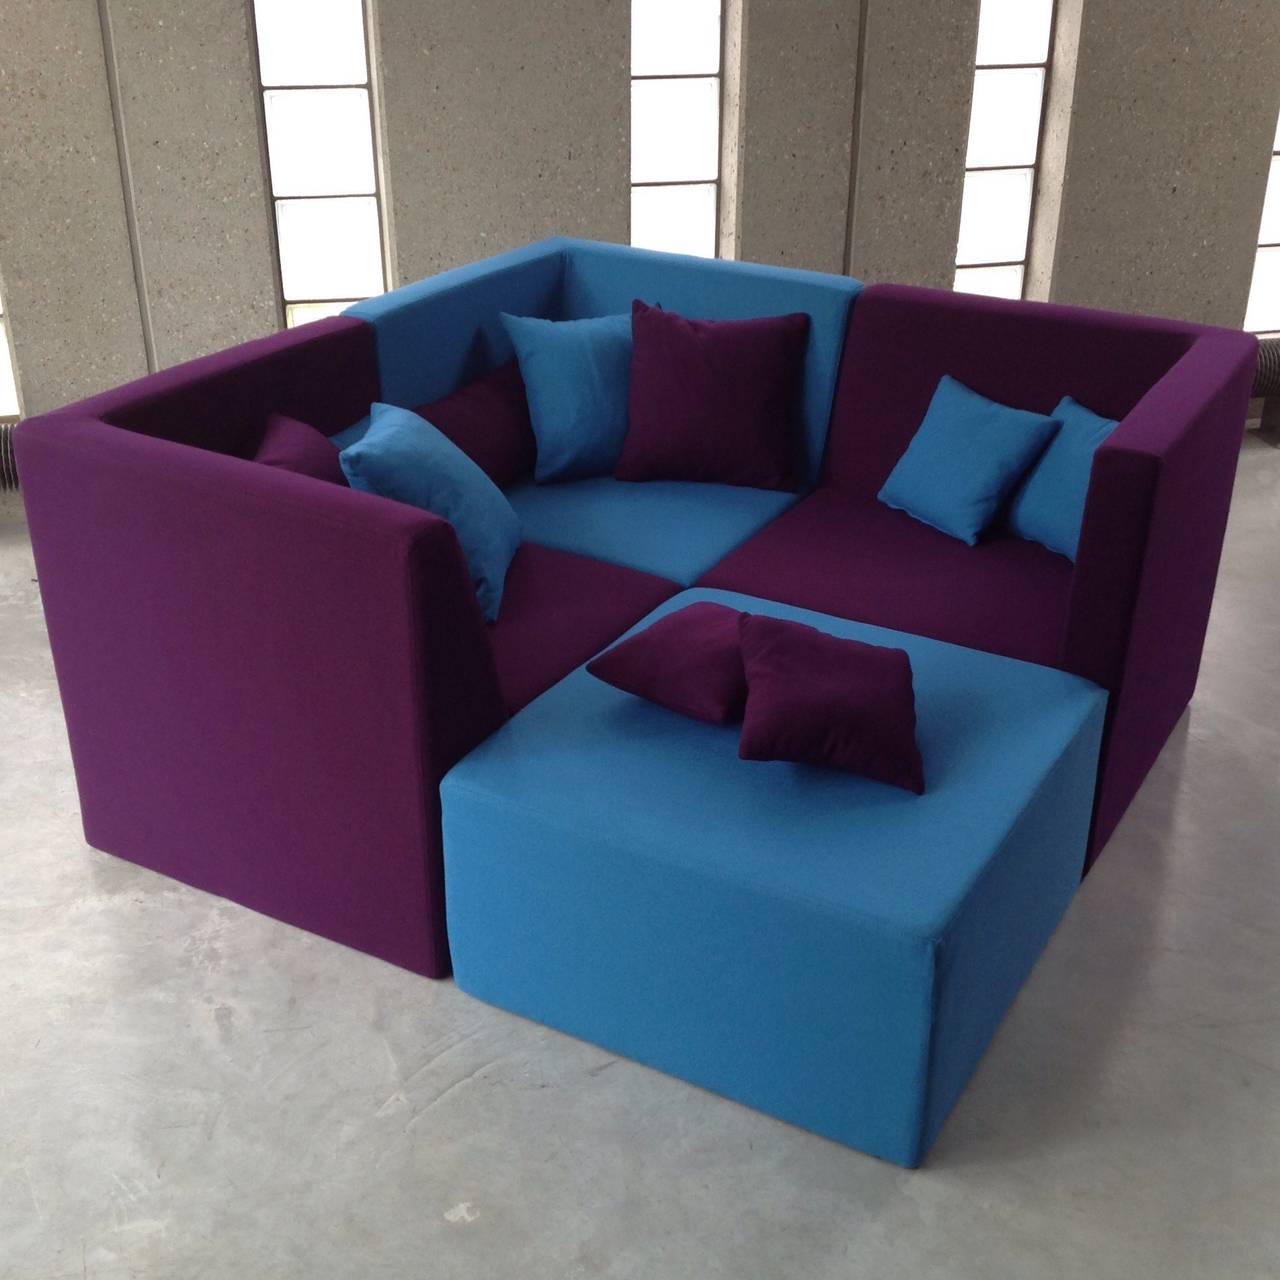 Complete restoration, renovation to the contemporary comfort with original Kvadrat fabric, deep purple and light sea blue, . . . 
Including 10 small cushions.

Super rare avant garde modular seating landscape designed by Verner Panton for Alfred